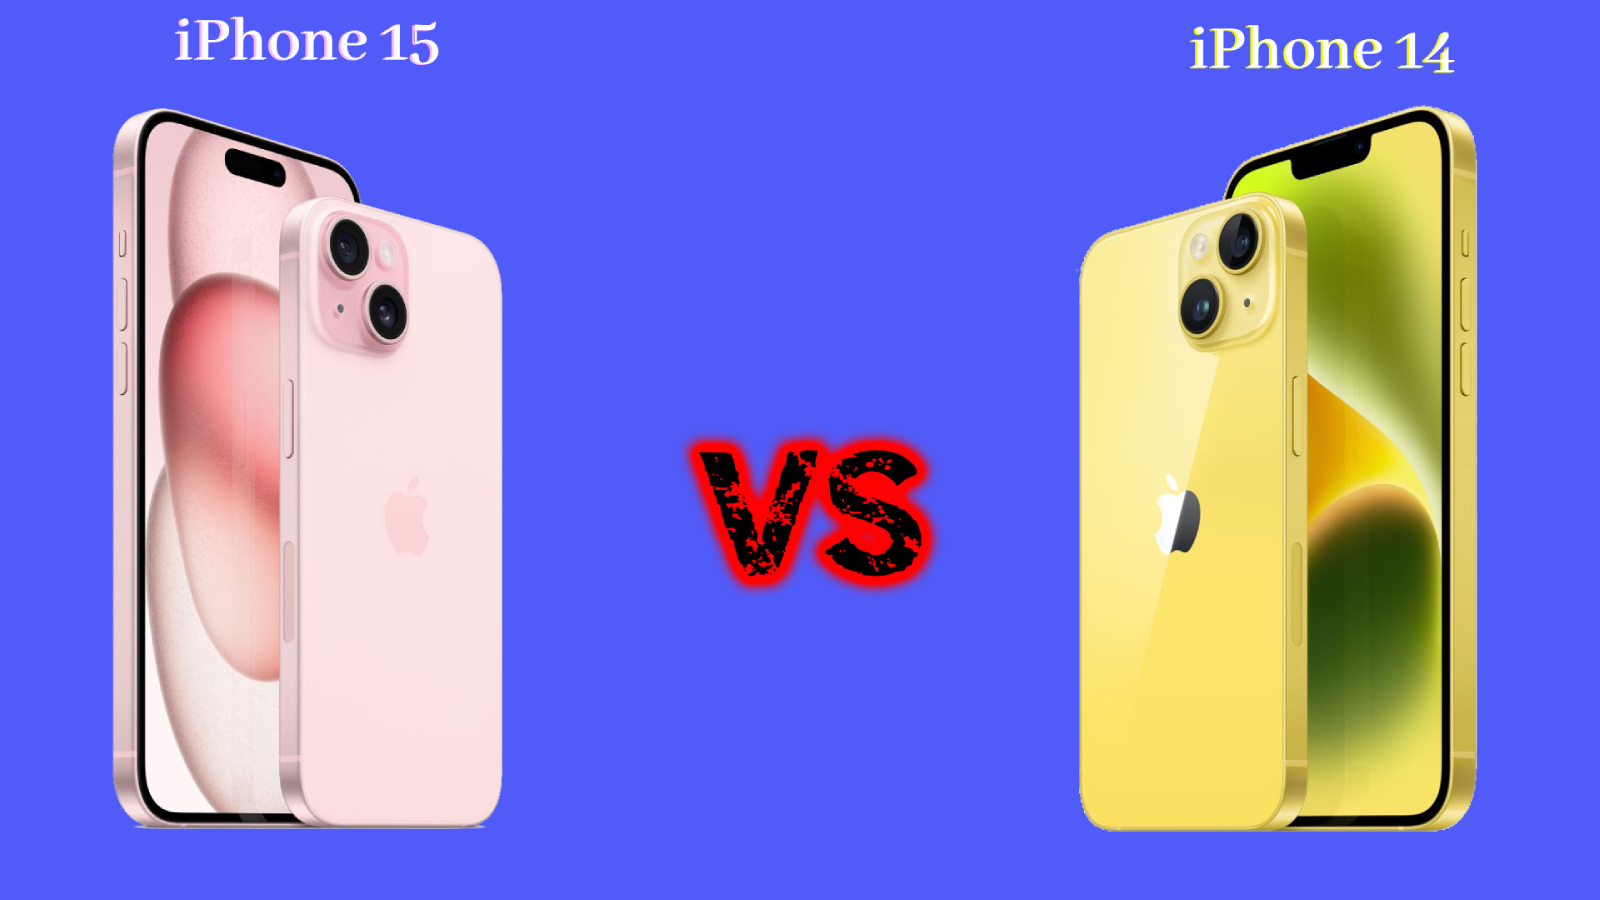 iPhone 15 vs iPhone 14: Which one should you buy